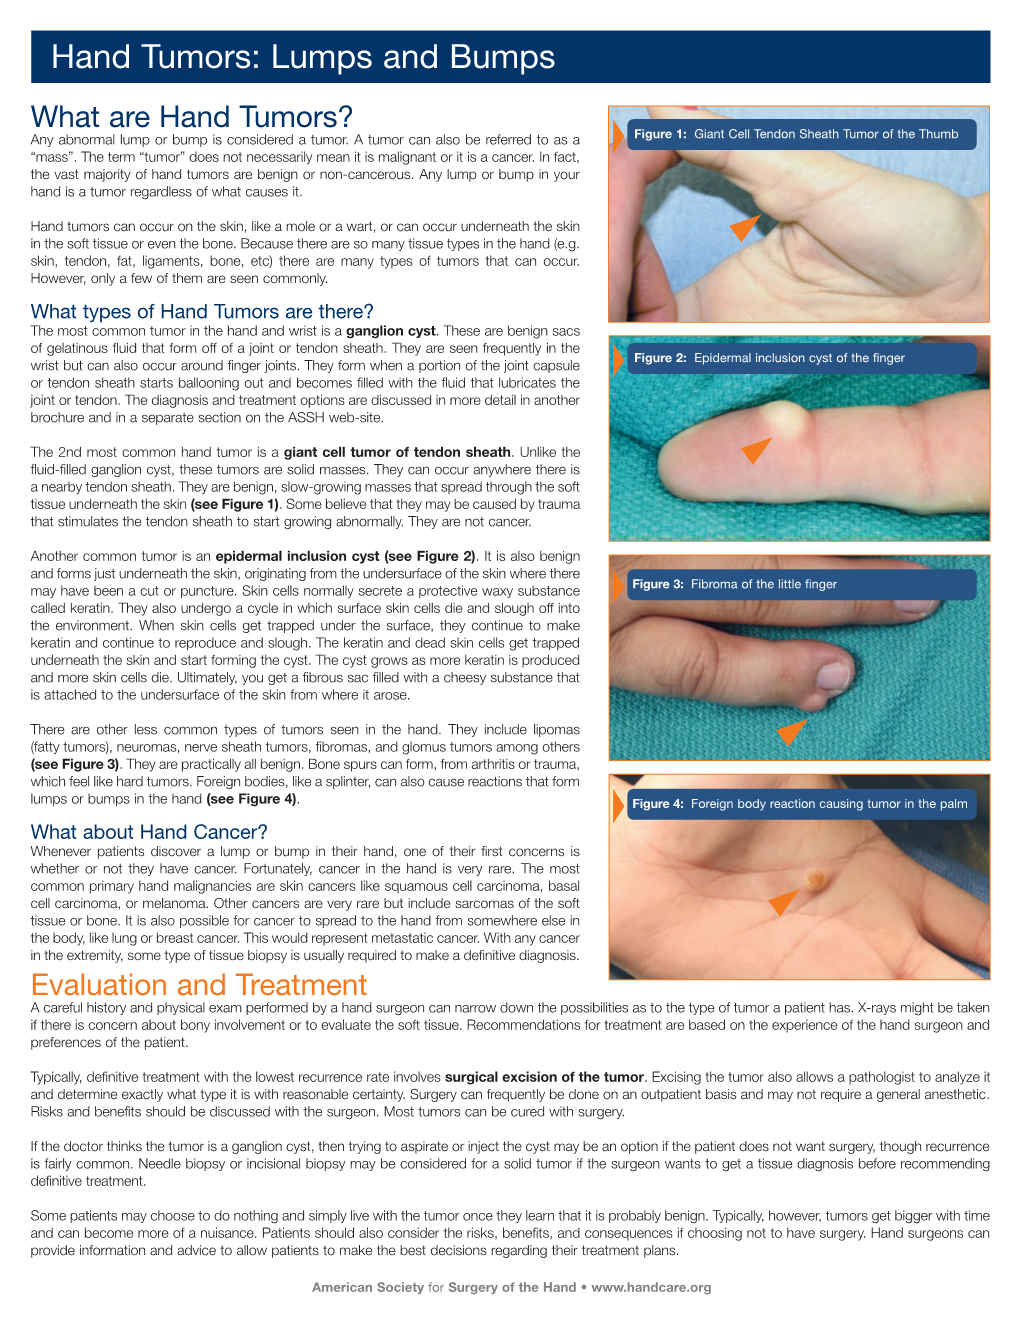 Hand Tumors: Lumps and Bumps What Are Hand Tumors? Any Abnormal Lump Or Bump Is Considered a Tumor